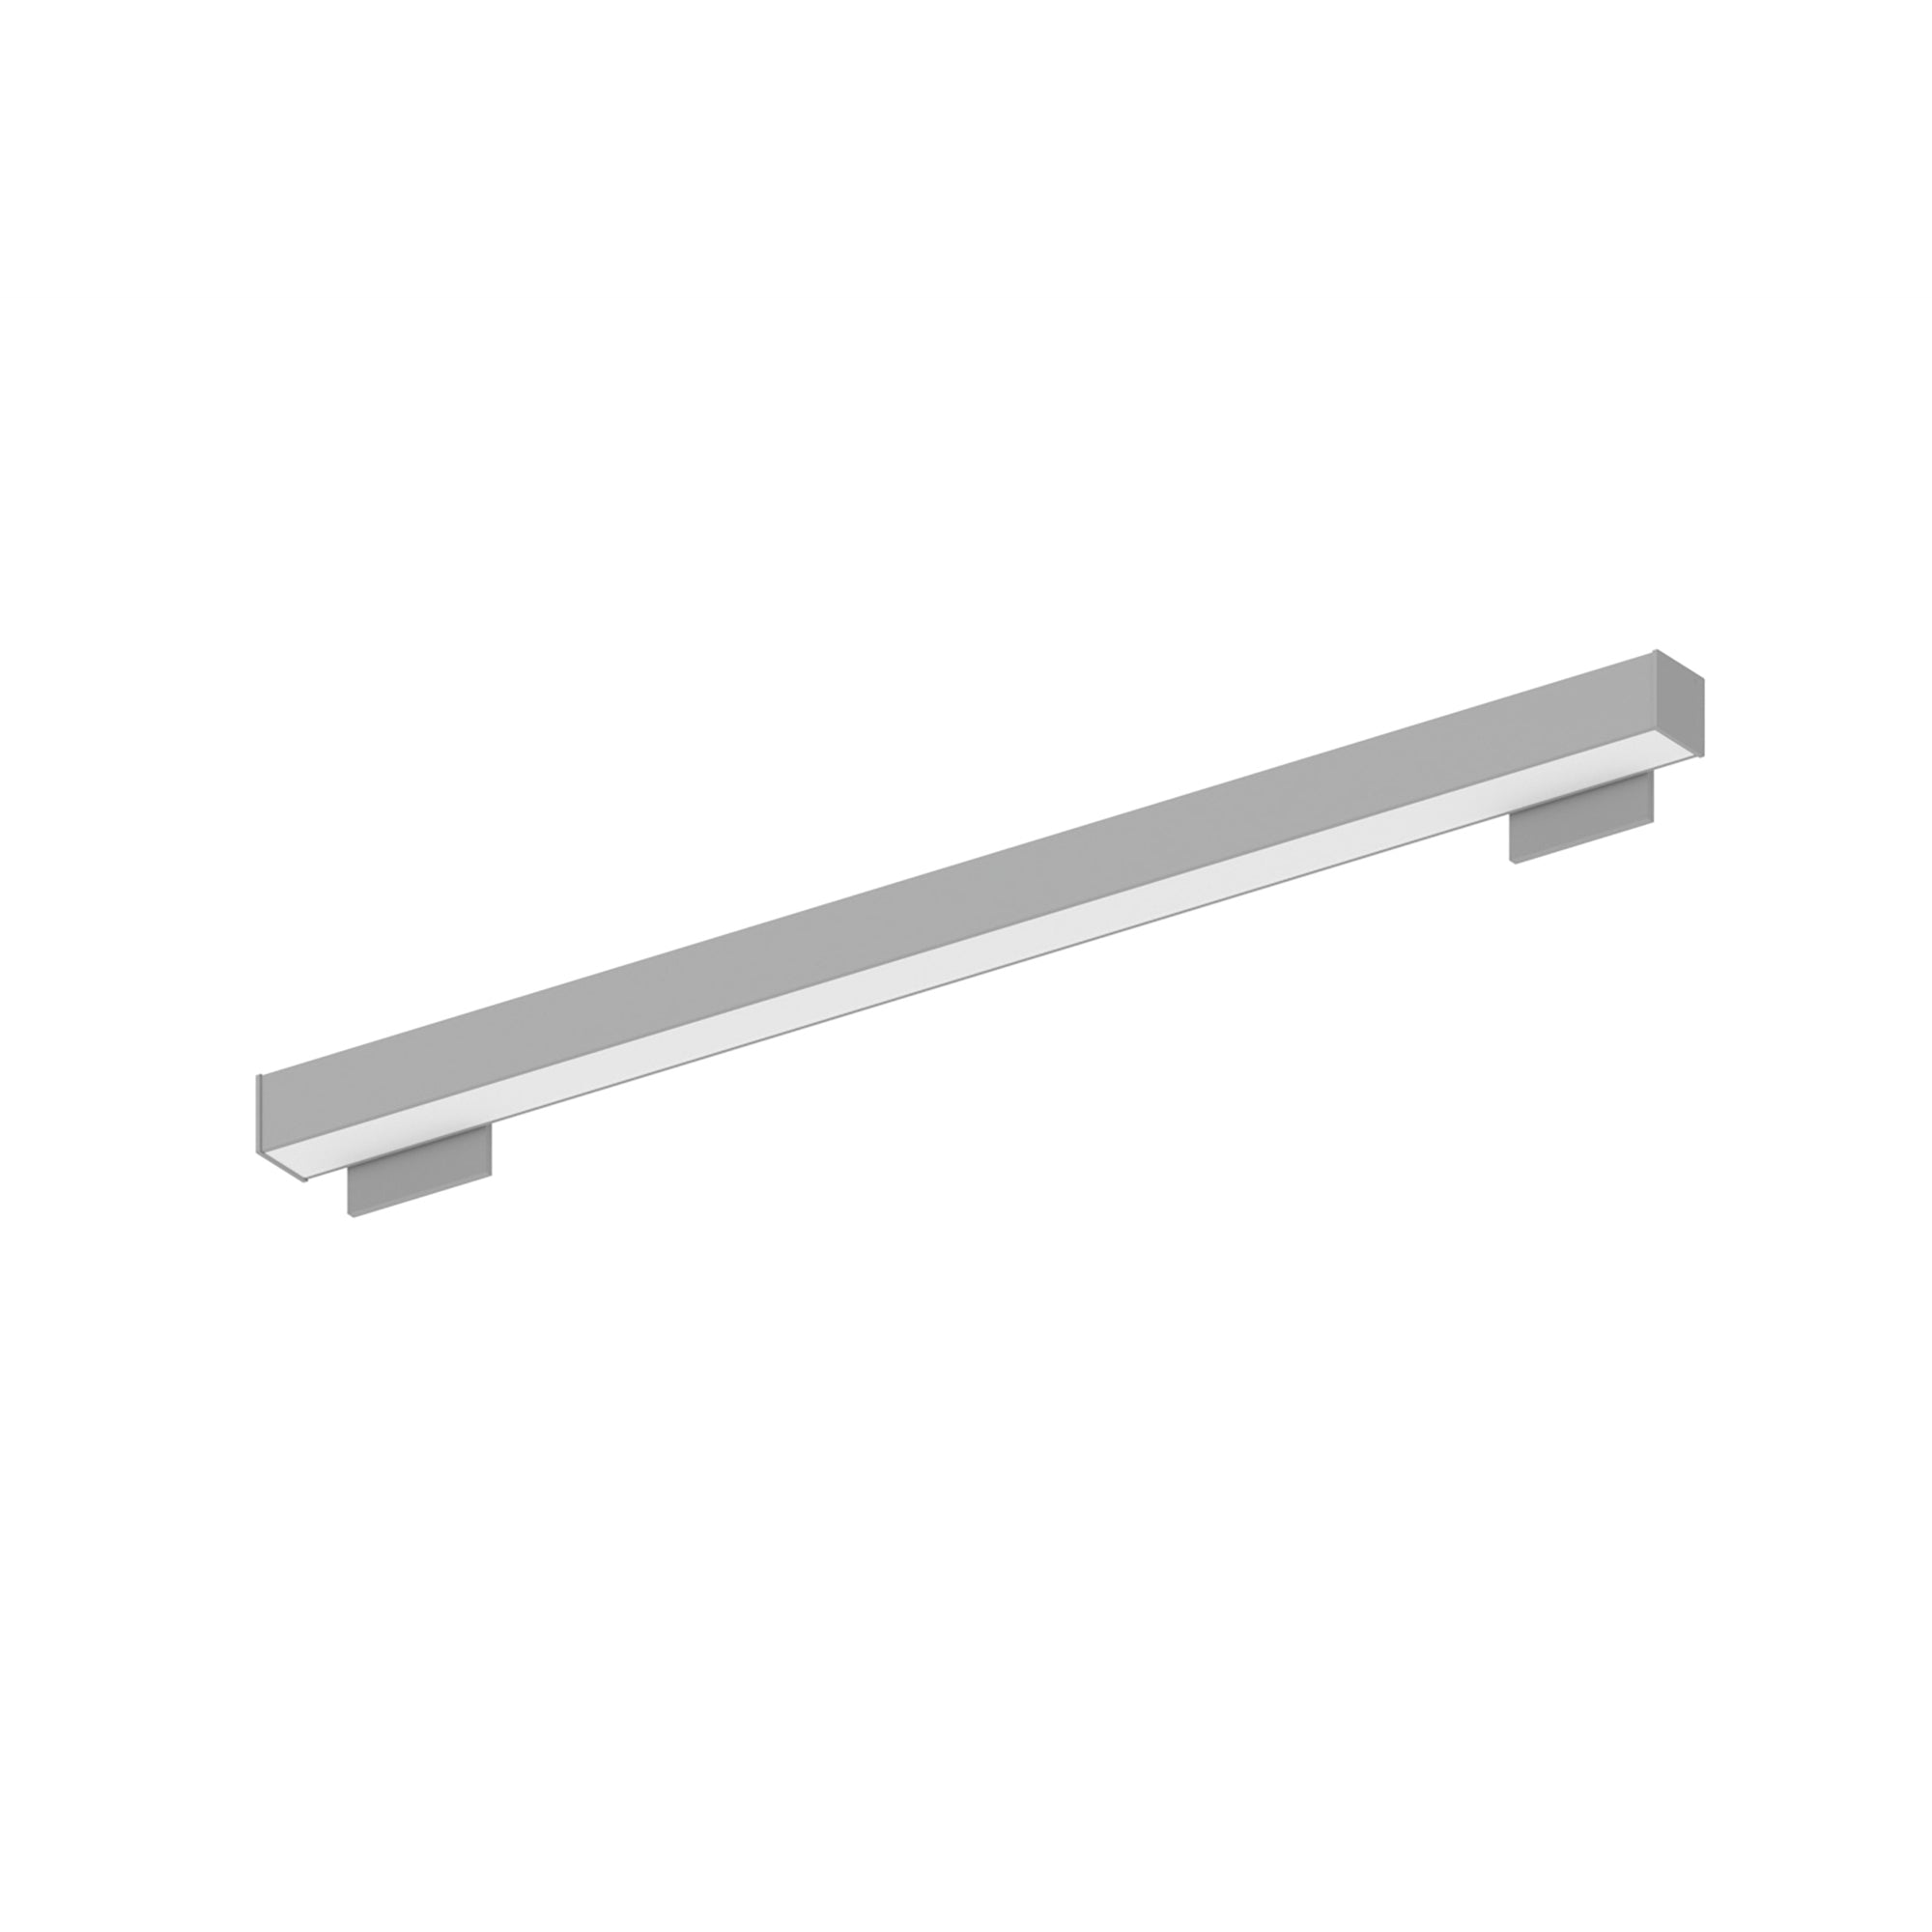 Nora Lighting NWLIN-41035A/L4-R4 - Linear - 4' L-Line LED Wall Mount Linear, 4200lm / 3500K, 4 Inchx4 Inch Left Plate & 4 Inchx4 Inch Right Plate, Aluminum Finish